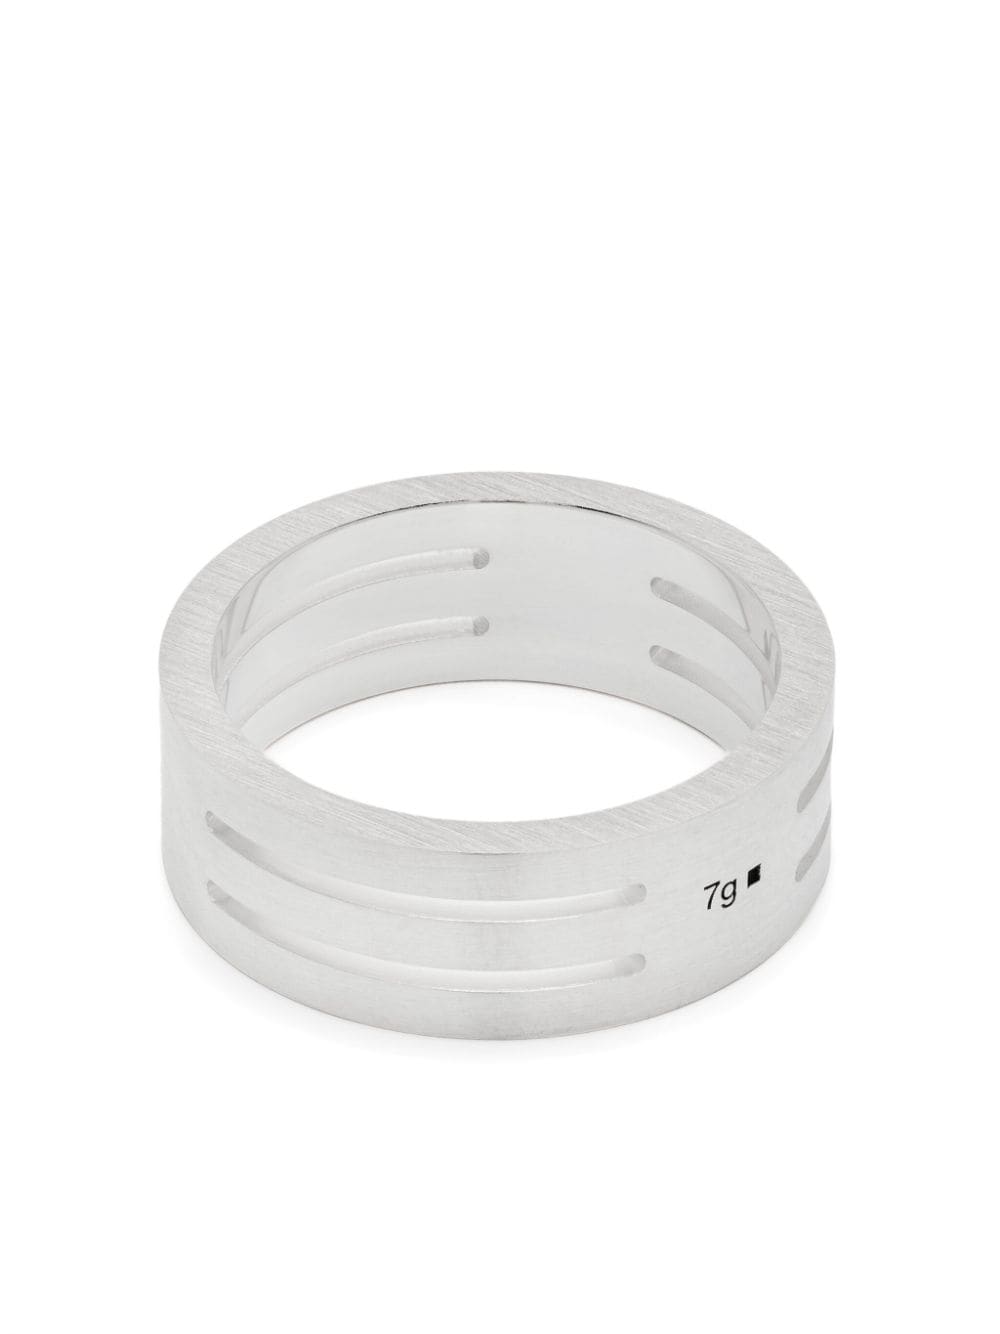 La 7g perforated ring